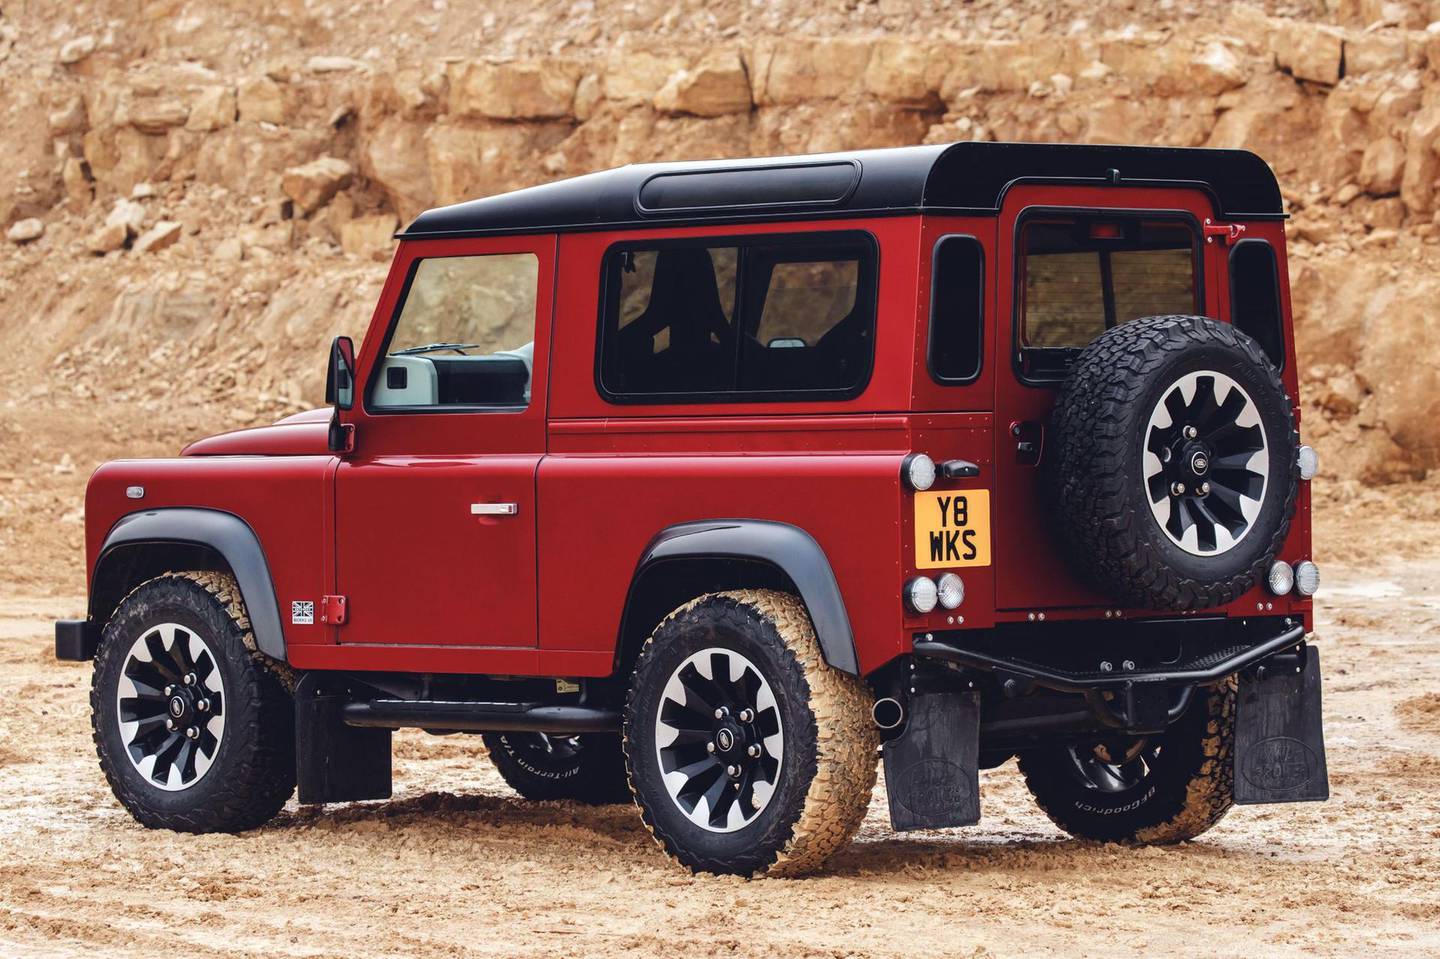 The souped-up Defender maintains the long-running model's classic look. Jaguar Land Rover